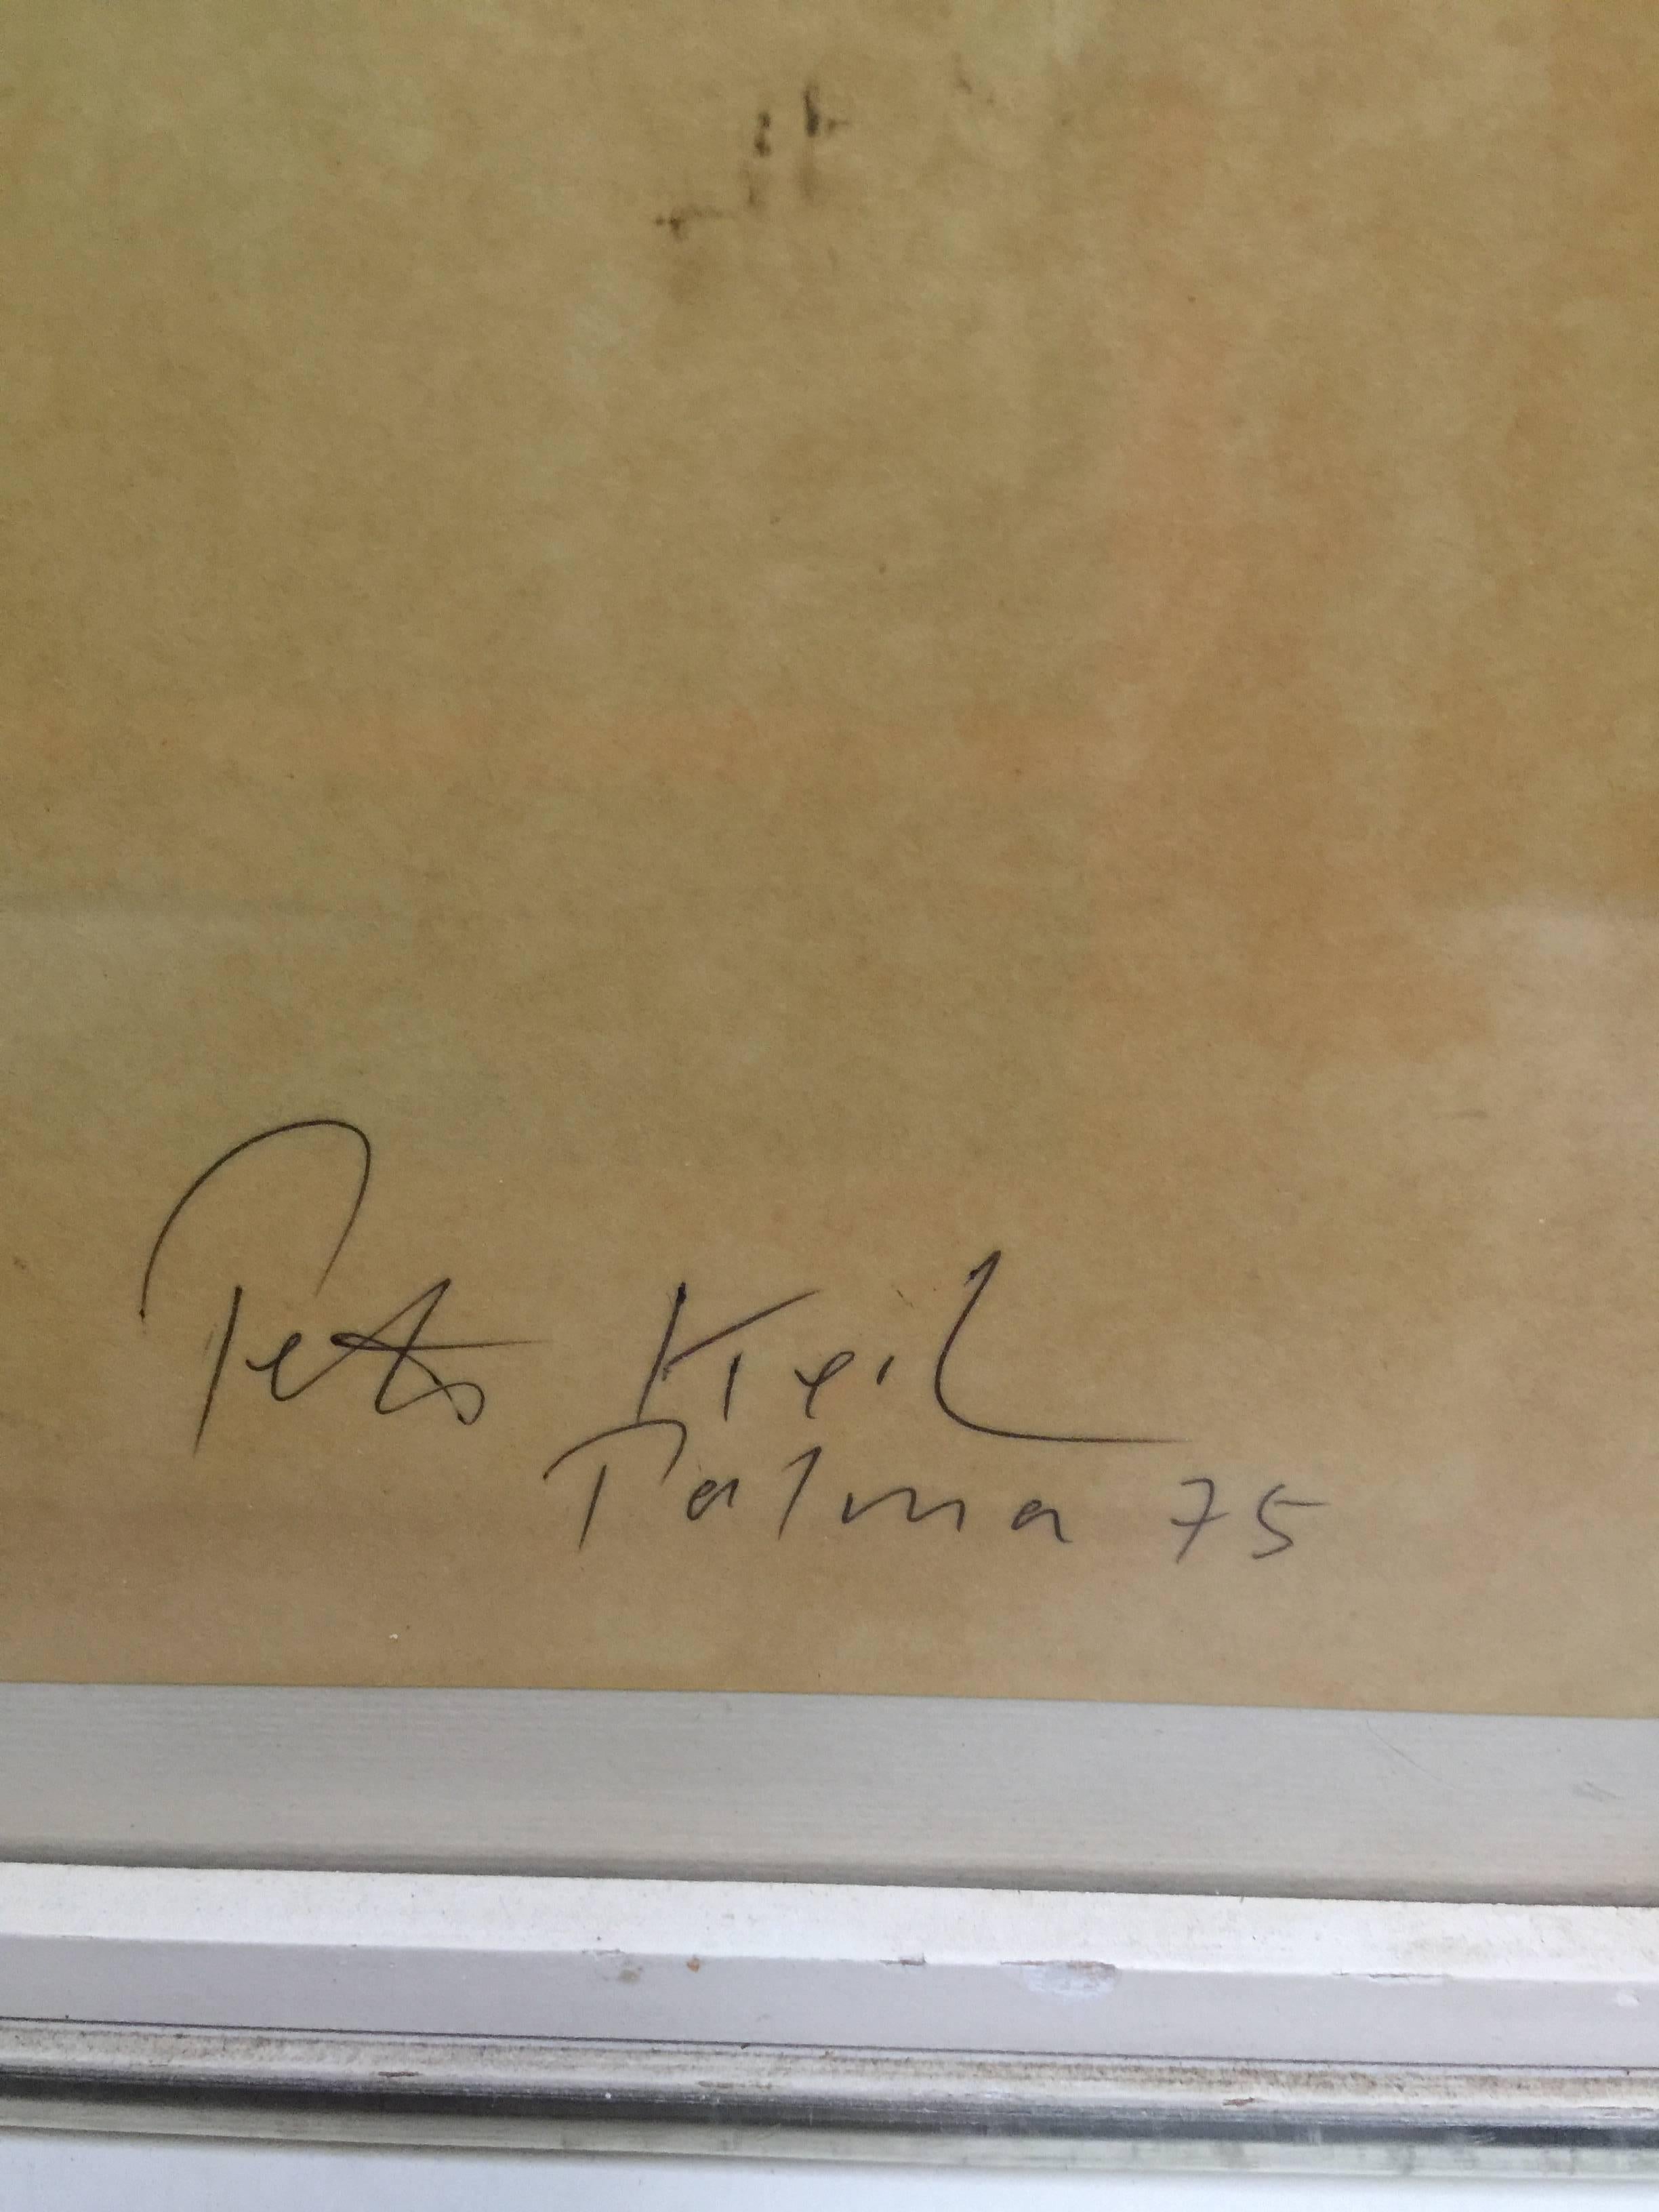 One of Peter Keil's highly desirable face paintings, signed and dated 1975.